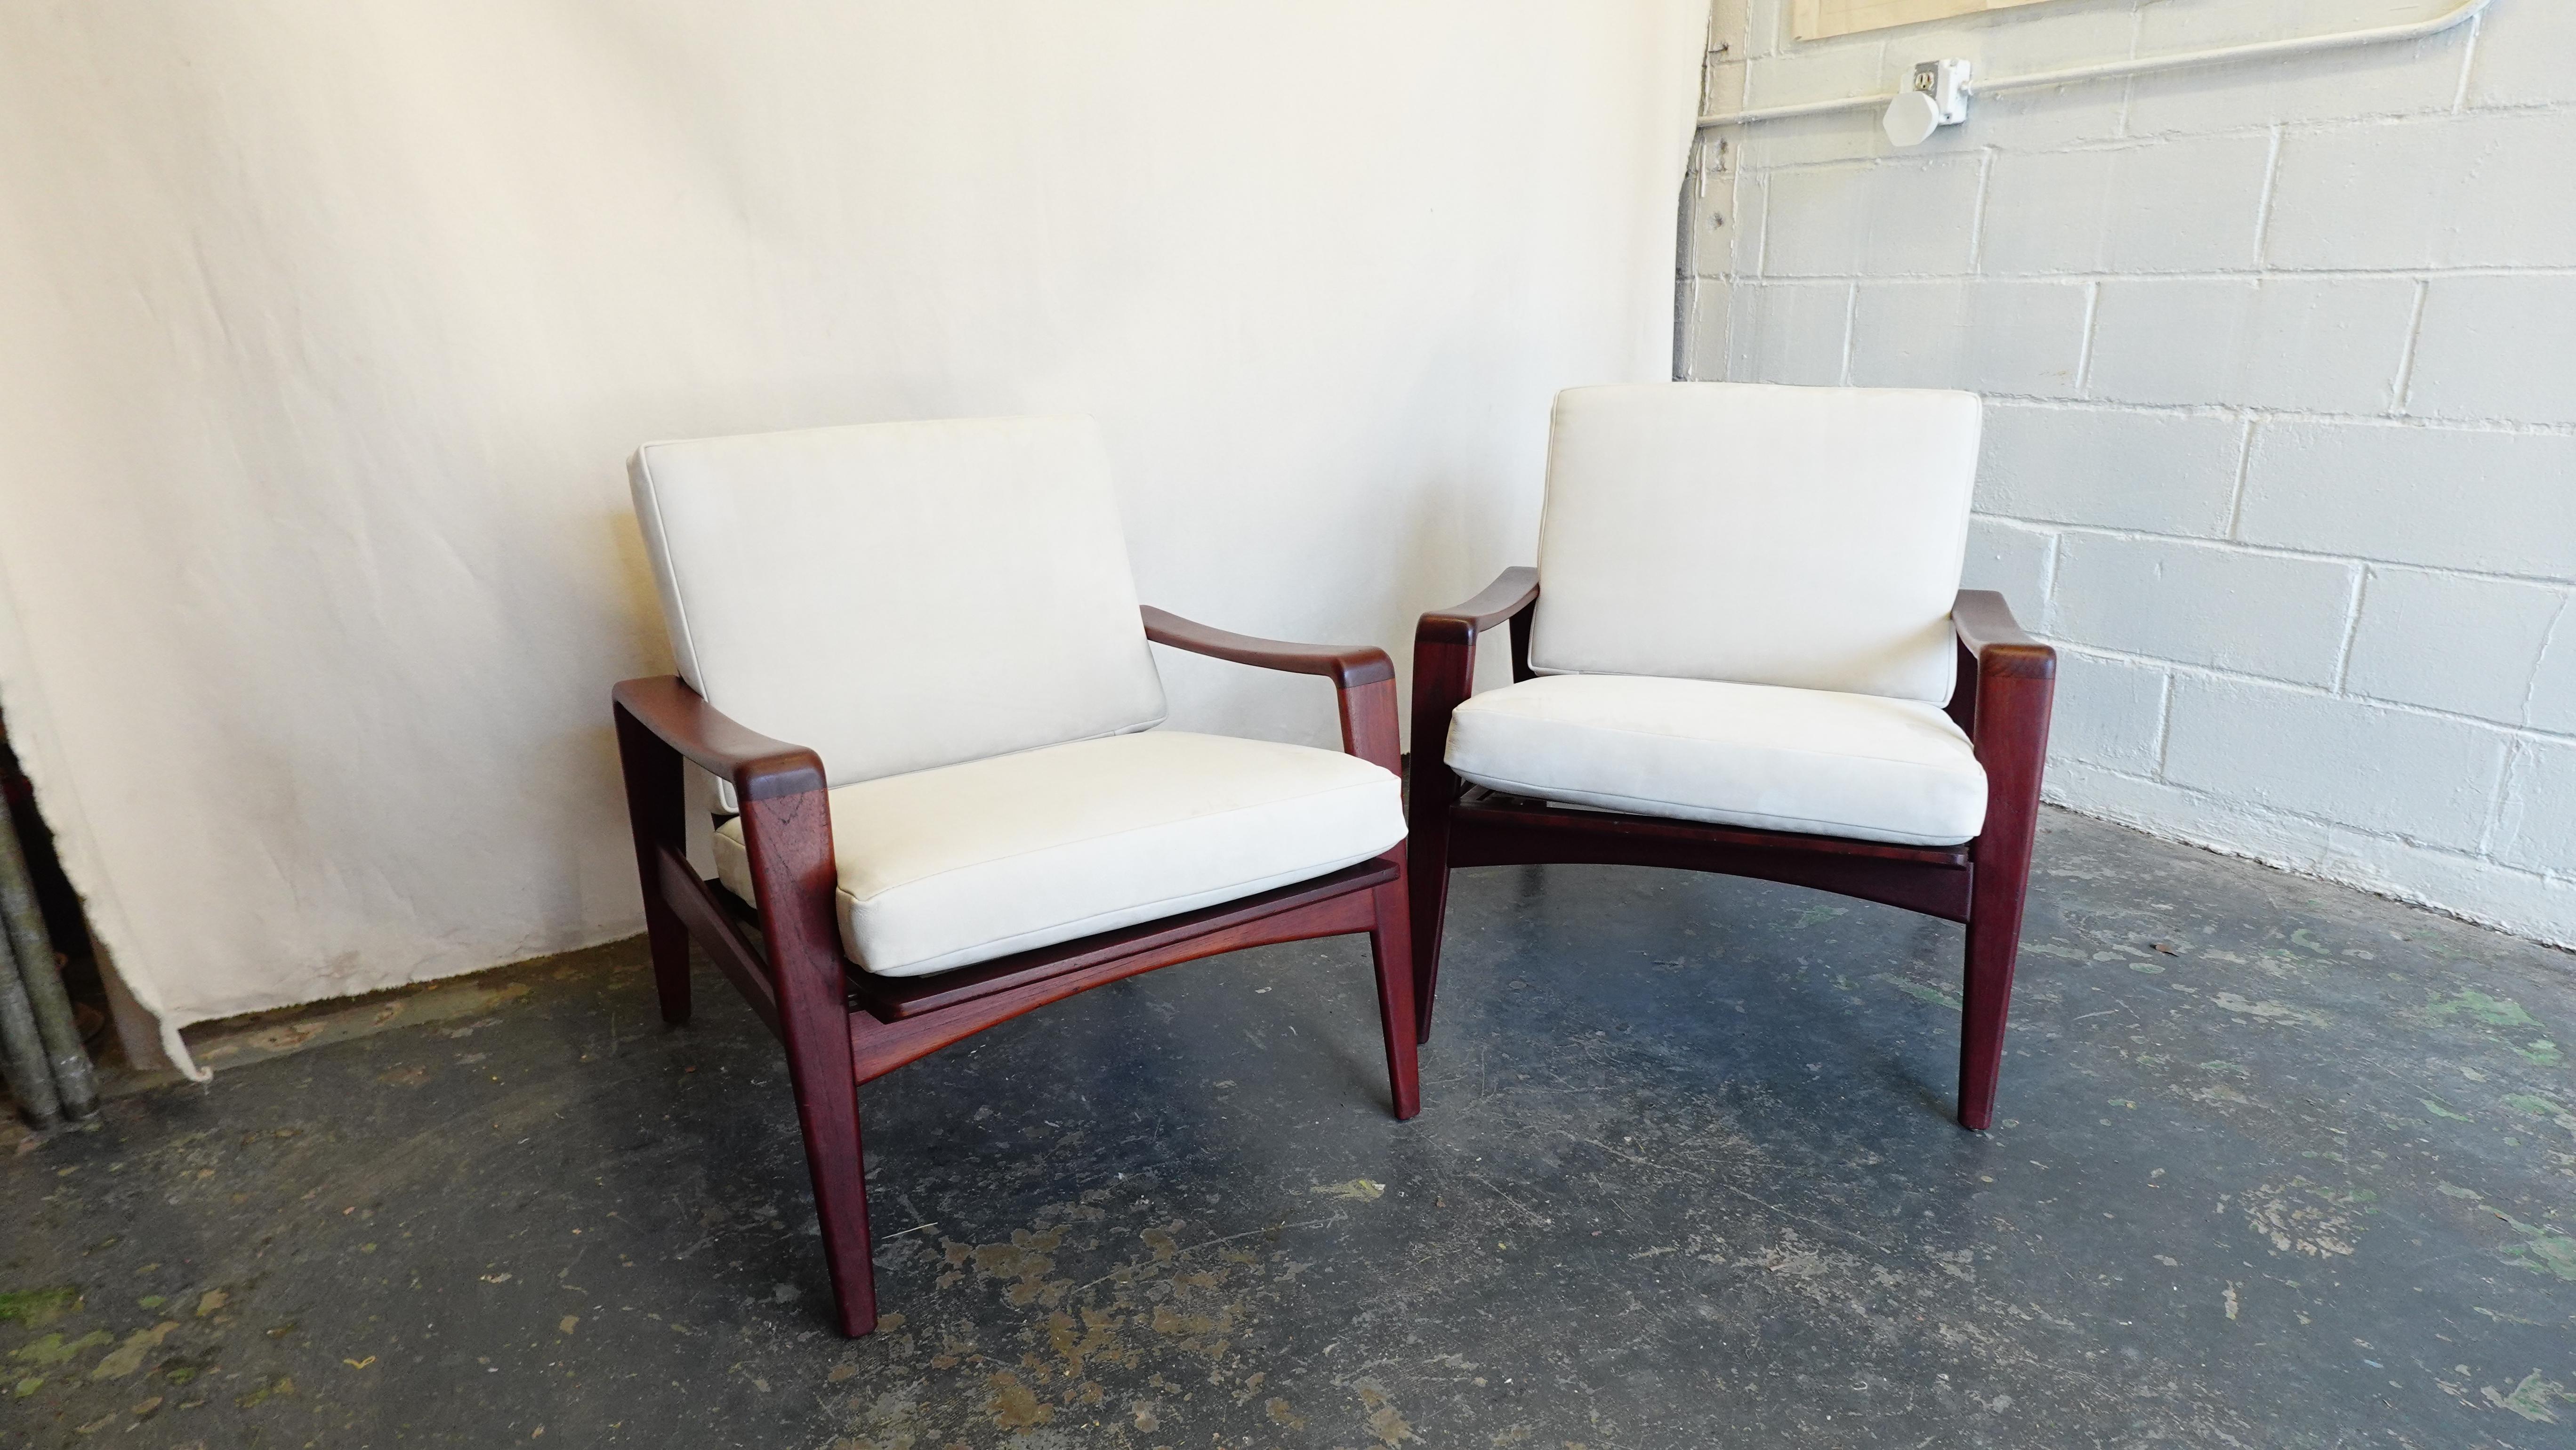 Pair of Arne Wahl Iverson Lounge Chairs for Komfort in Teak & Leather, 1960 For Sale 7